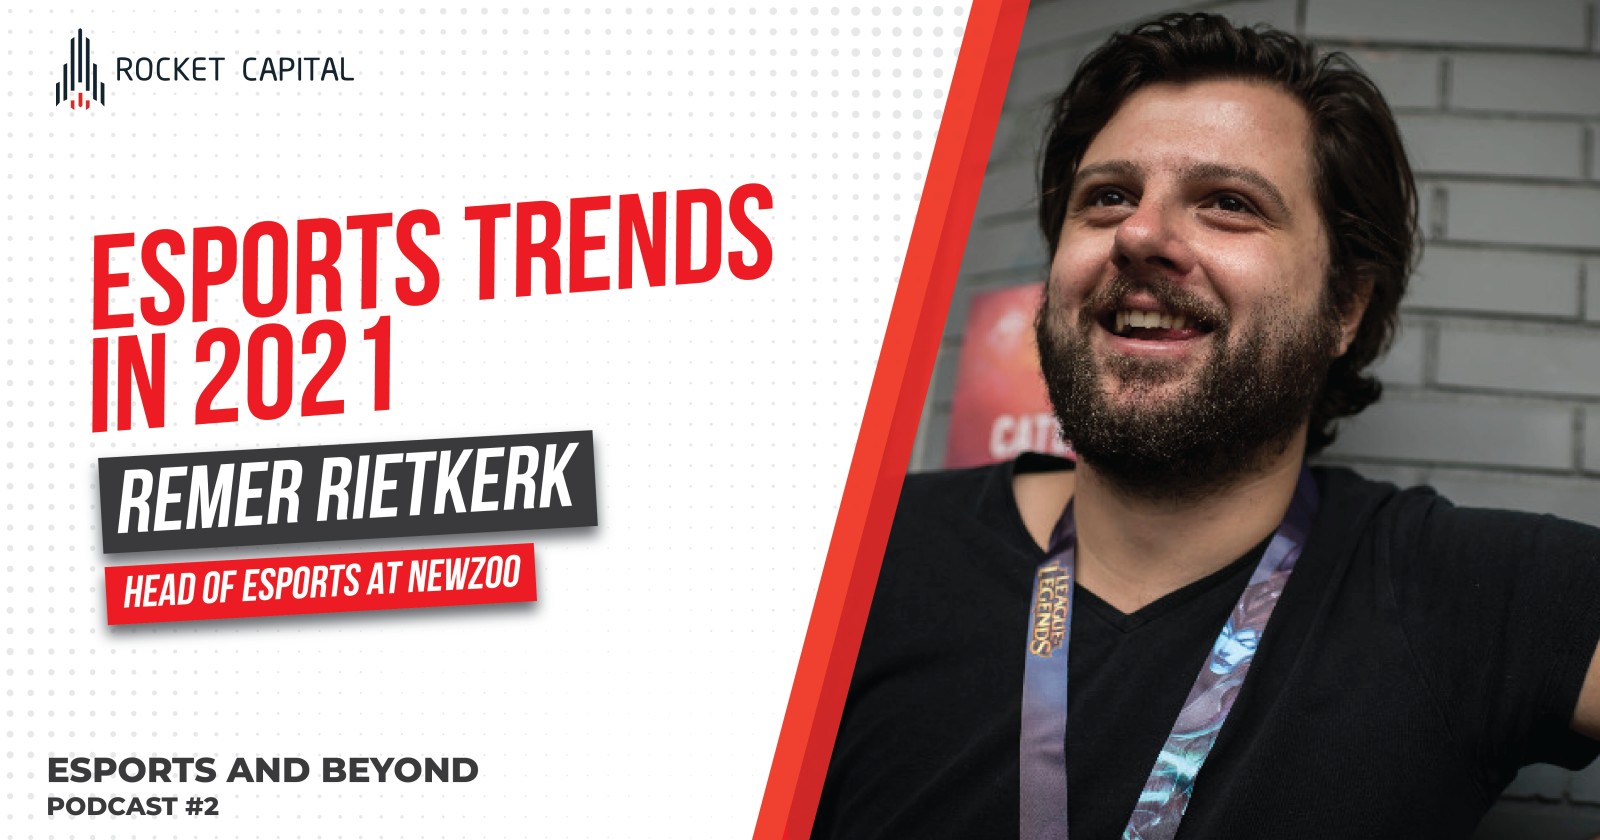 Esports Trends in 2021 with Remer Reitkerk